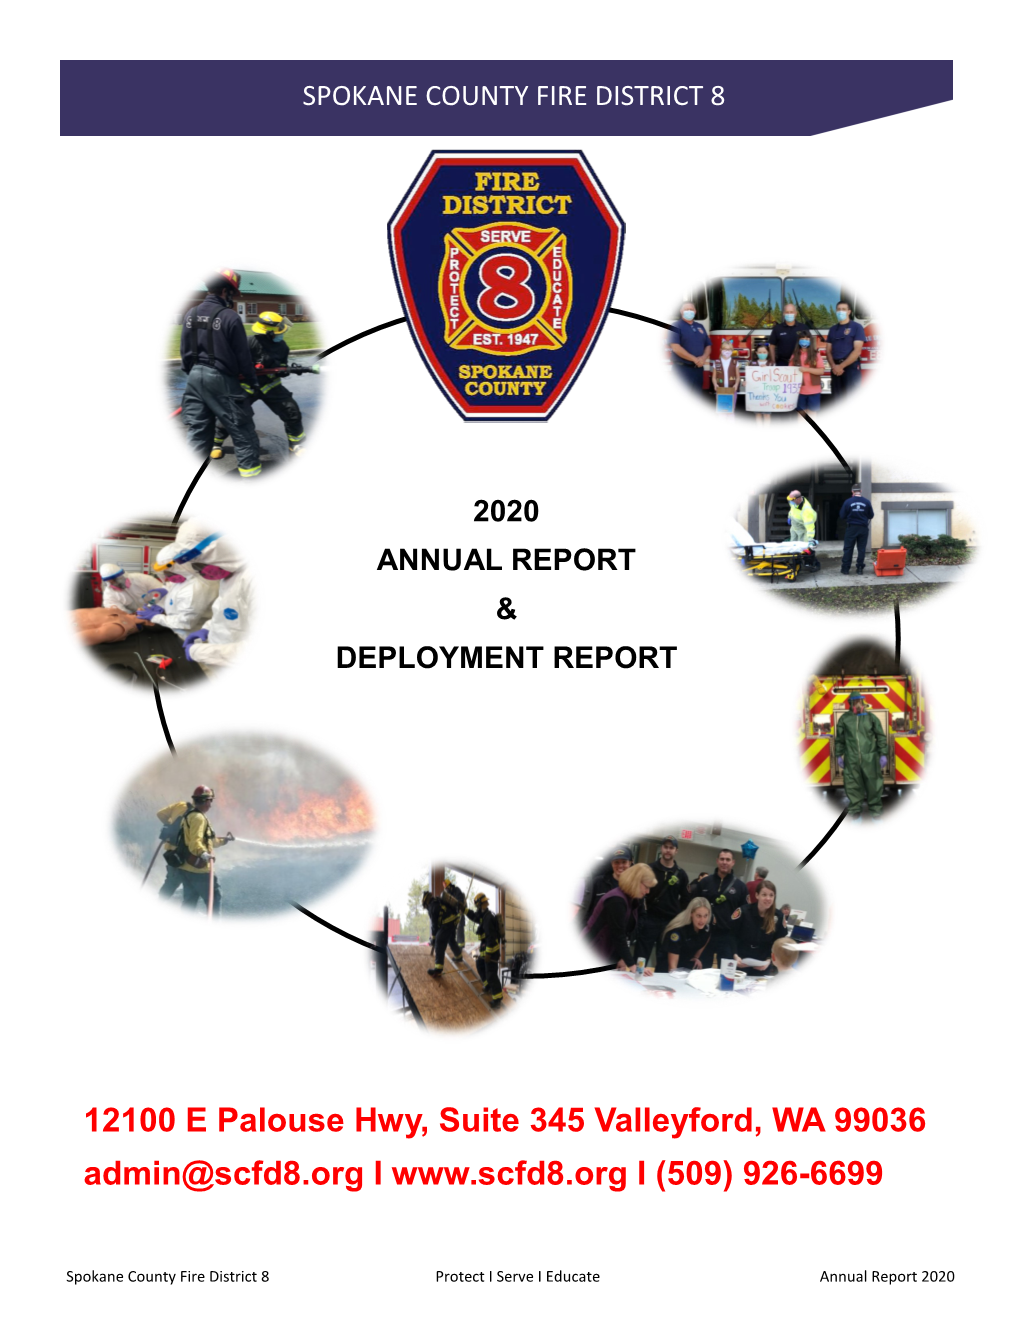 2020 Annual Report & Deployment Report